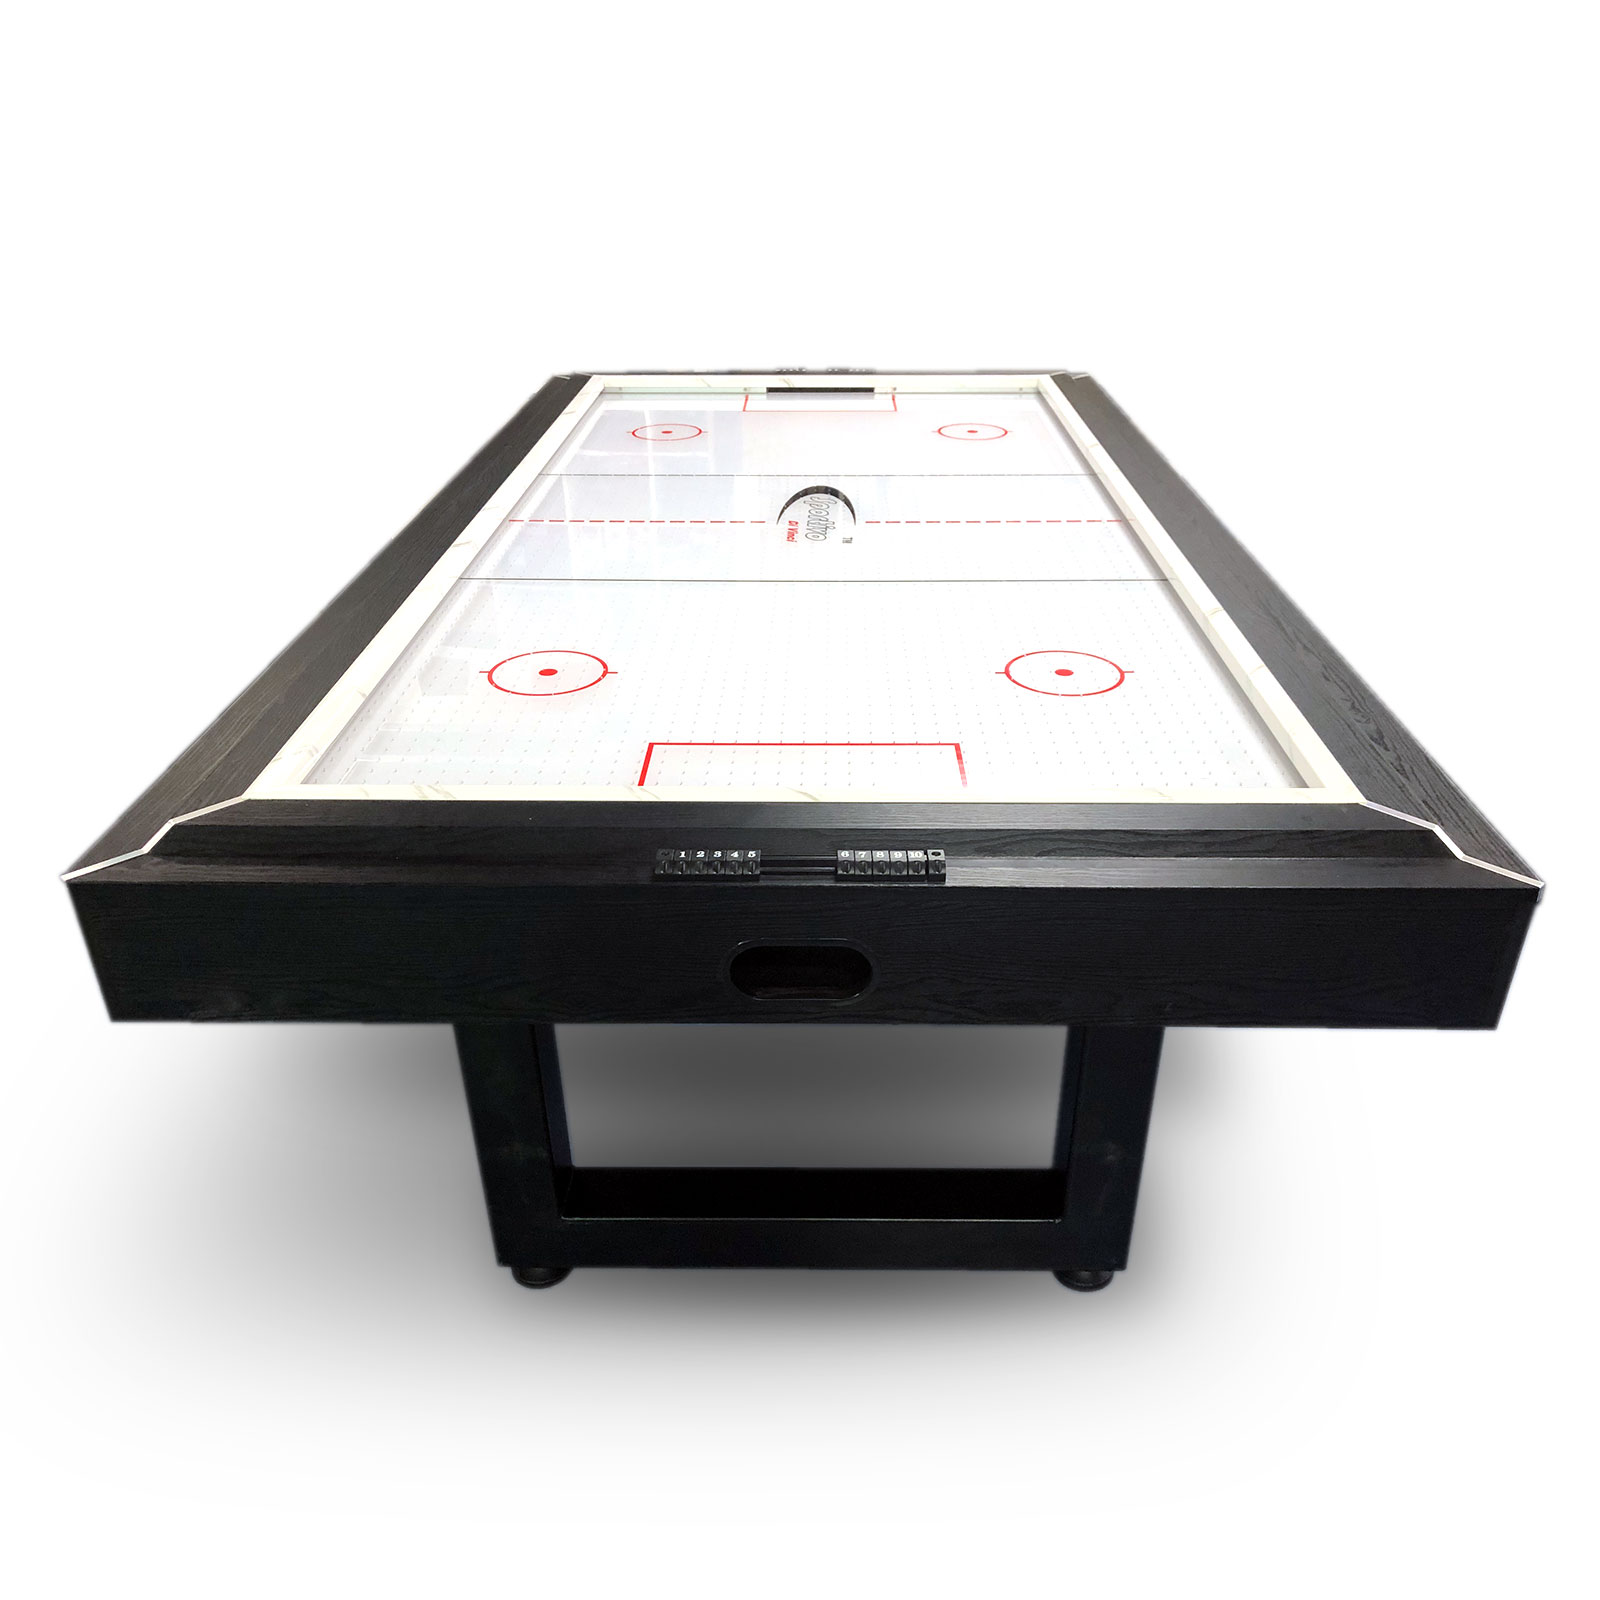 8ft Air Hockey Table with Perspex Top - Hurricane